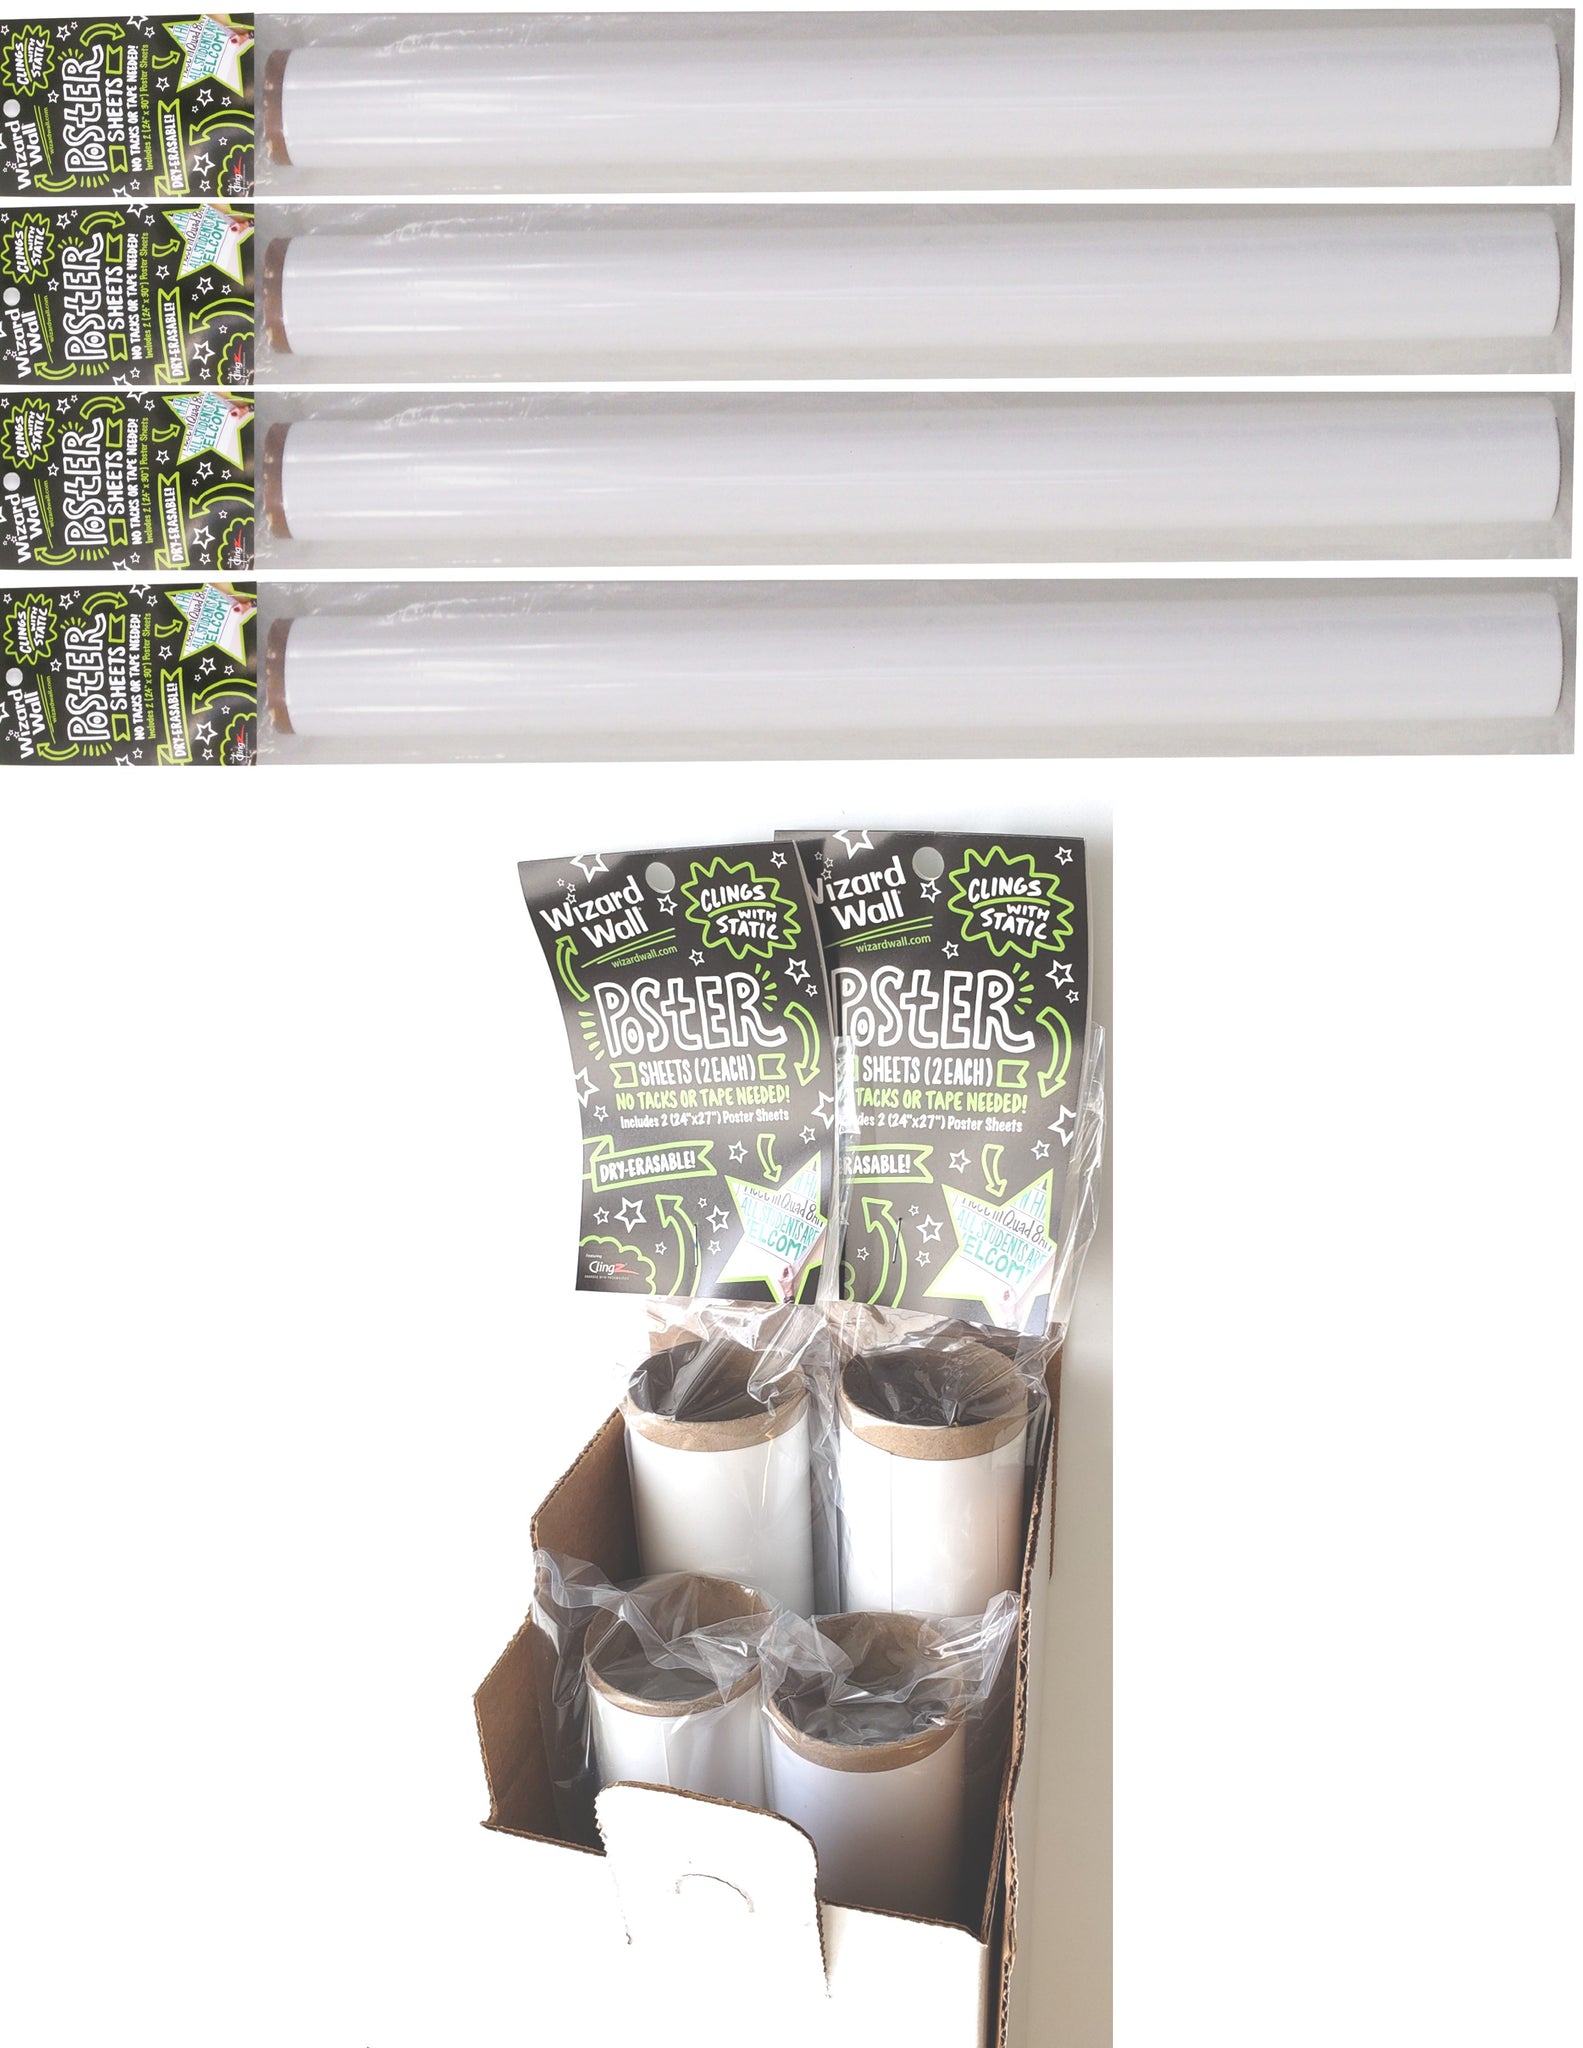 Basic Cling-rite® Roll - 20 sheets and dry erase marker included